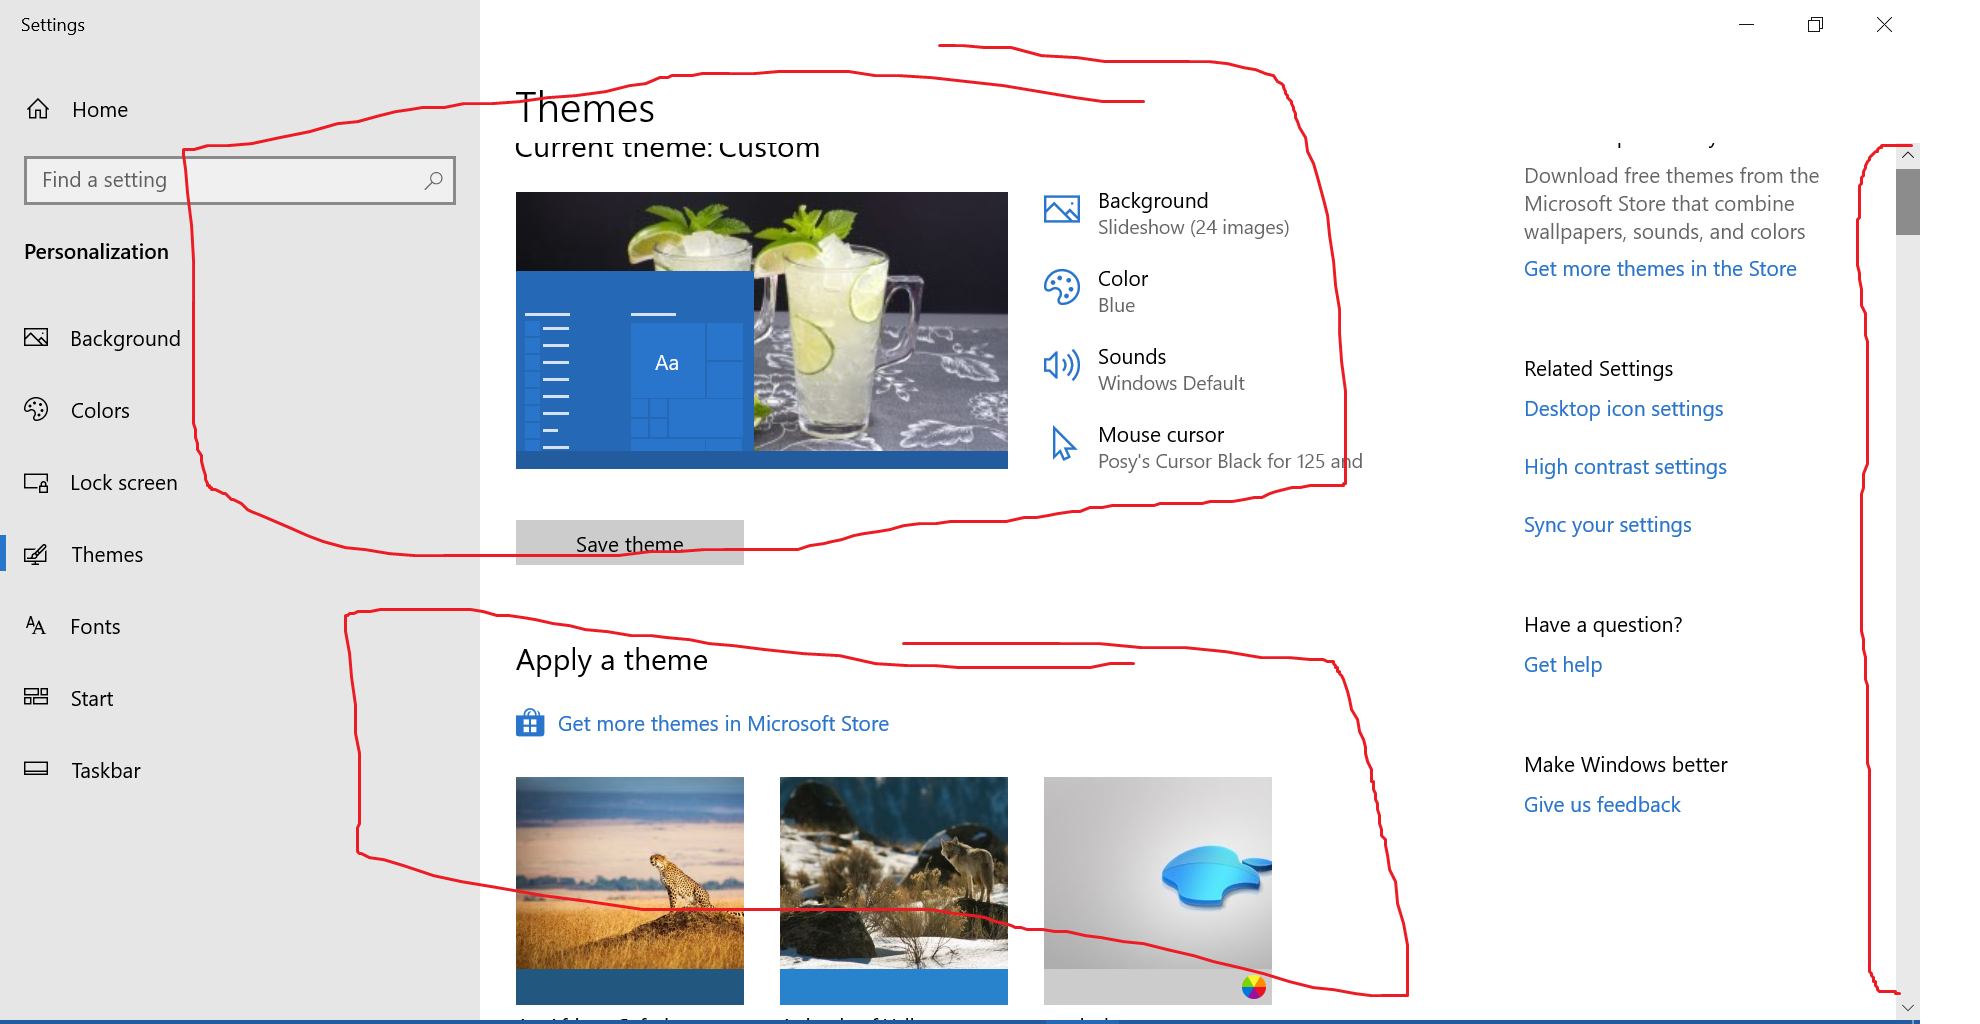 windows 10 themes scrolls up to first theme every change 55590c52-4d1b-46a8-a35a-beb74ee23d01?upload=true.png